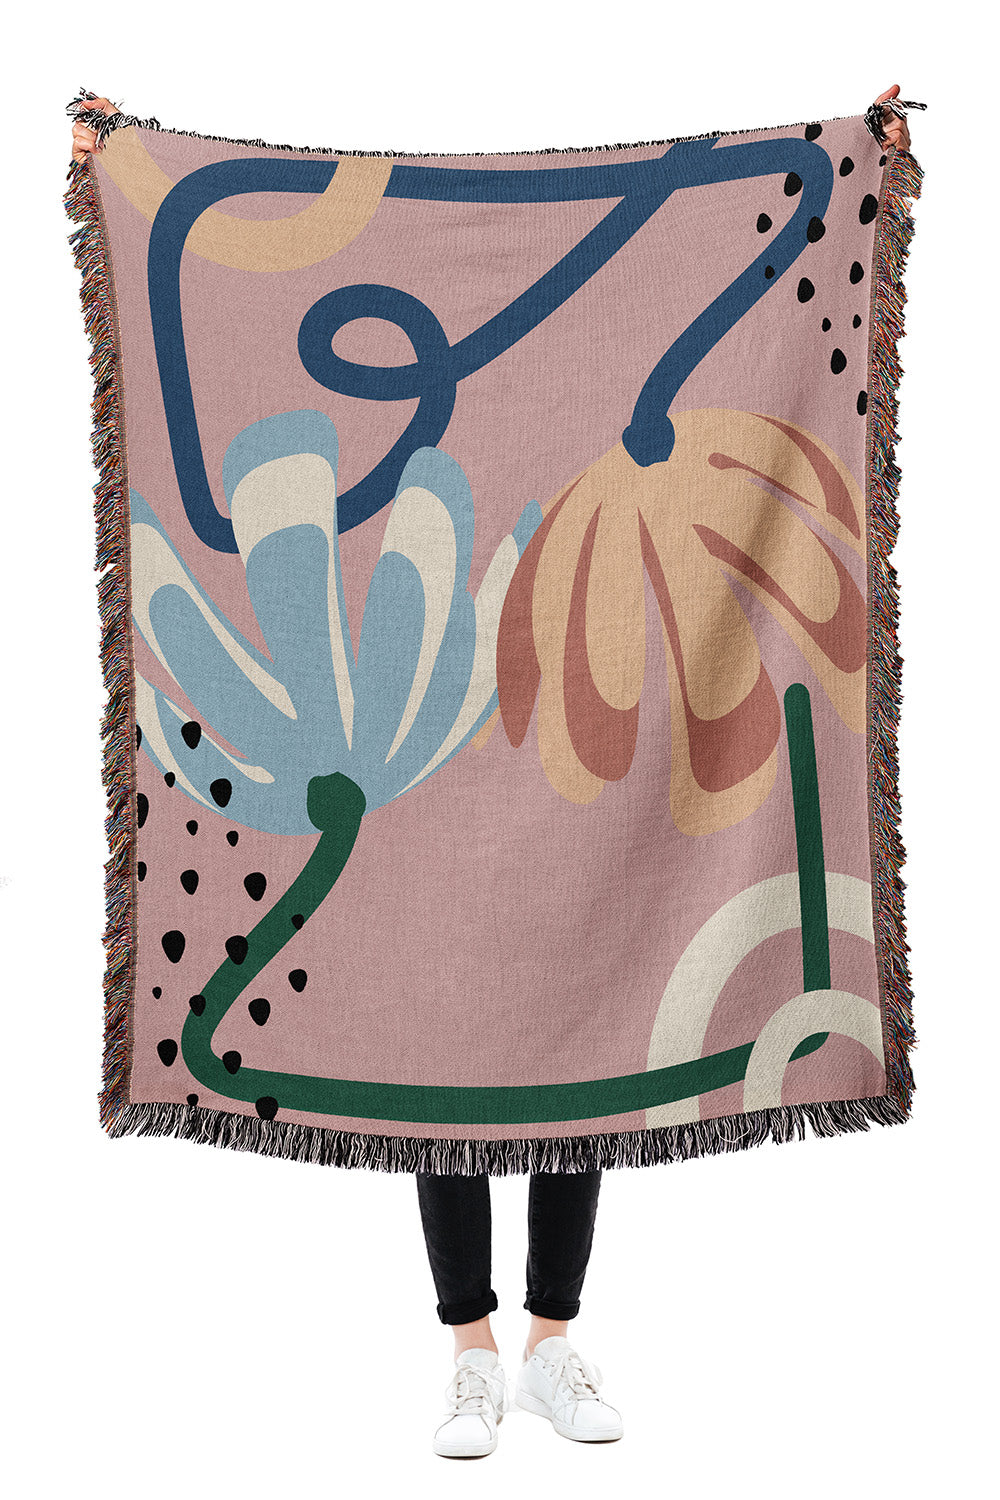 Abstract Garden Pink Cotton Woven Throw Blanket with a vibrant flower abstract design and fringe edges.